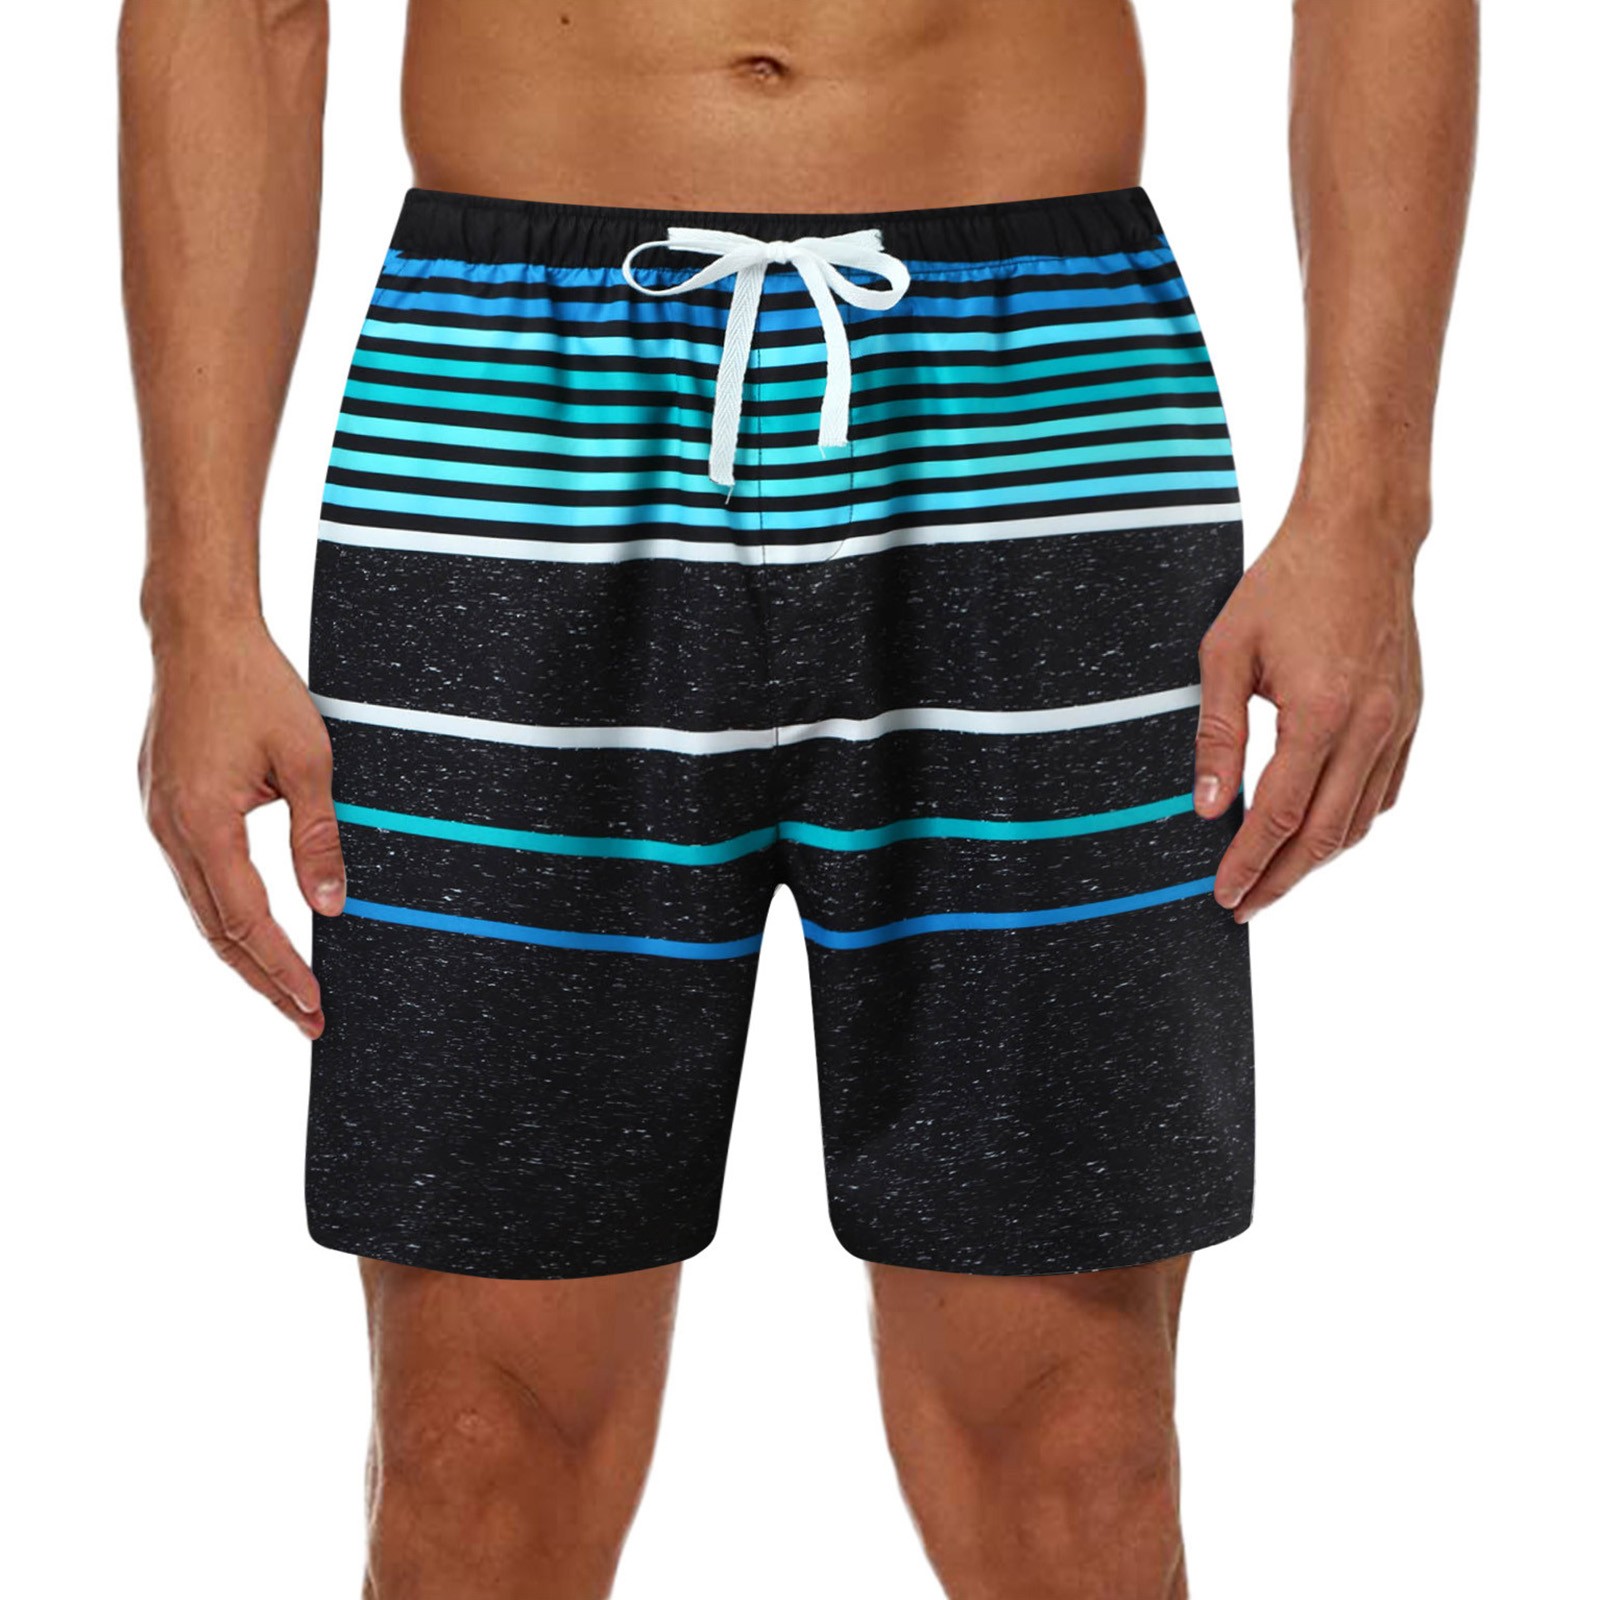 Himmake Bathing Suits for Men - Bathing Suit Swimming Suits for Boys ...